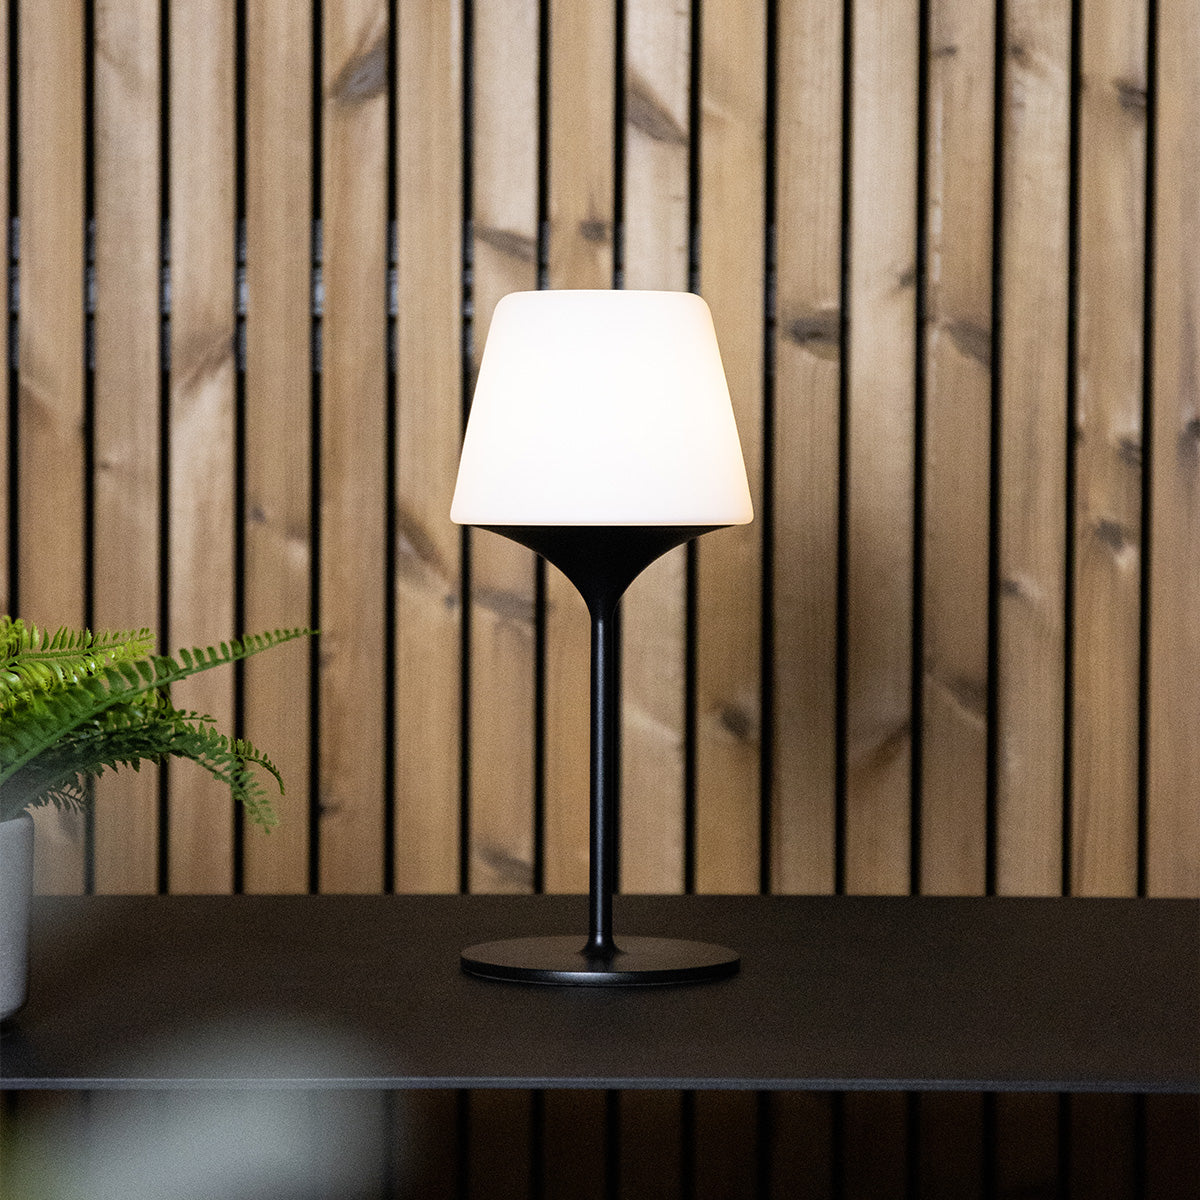 Ambience - Lamp Intelligent + Aalborg base [Contract]